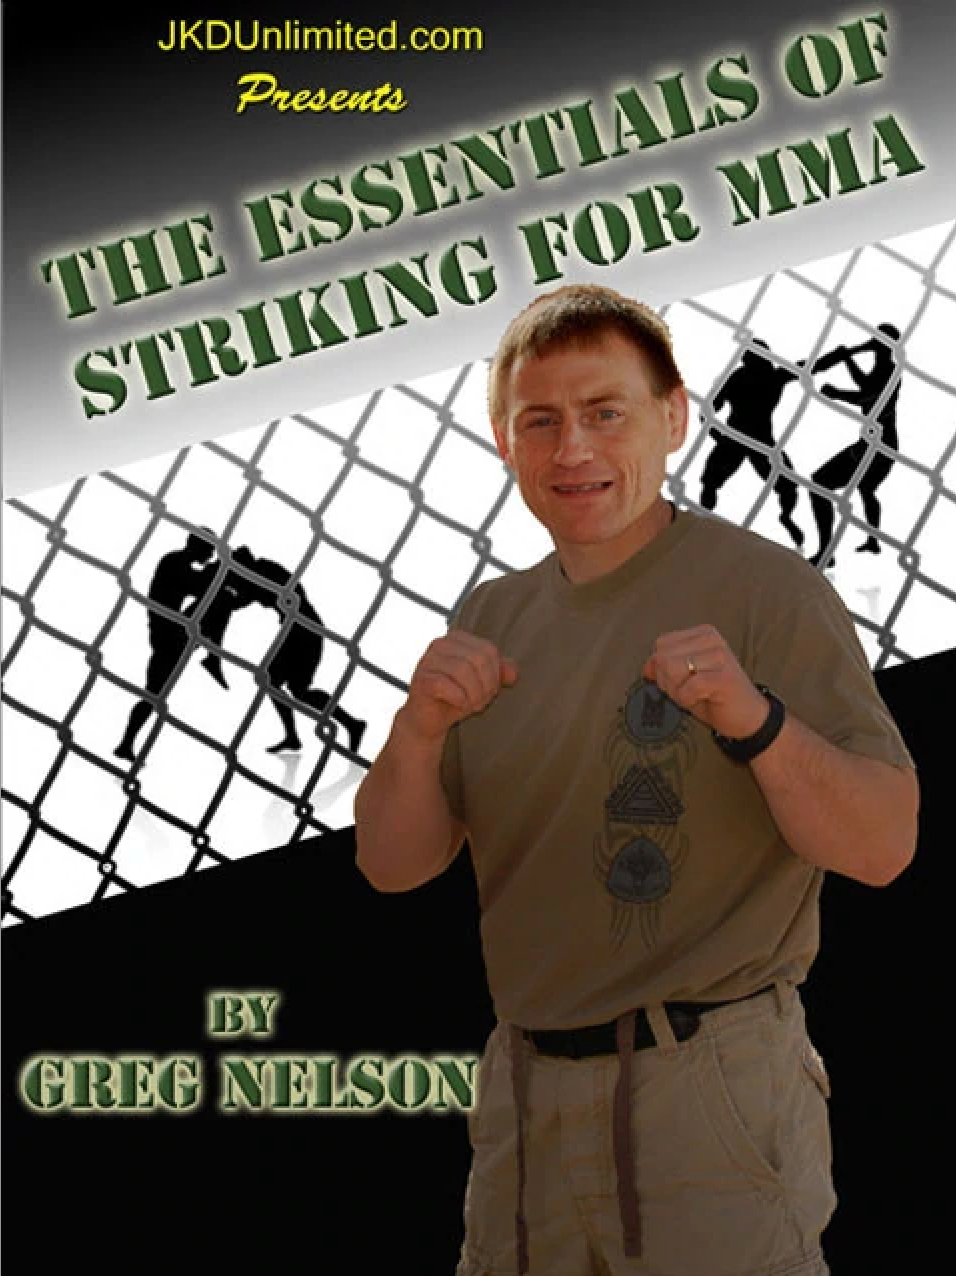 The Essentials of Striking for MMA DVD by Greg Nelson (Preowned) - Budovideos Inc